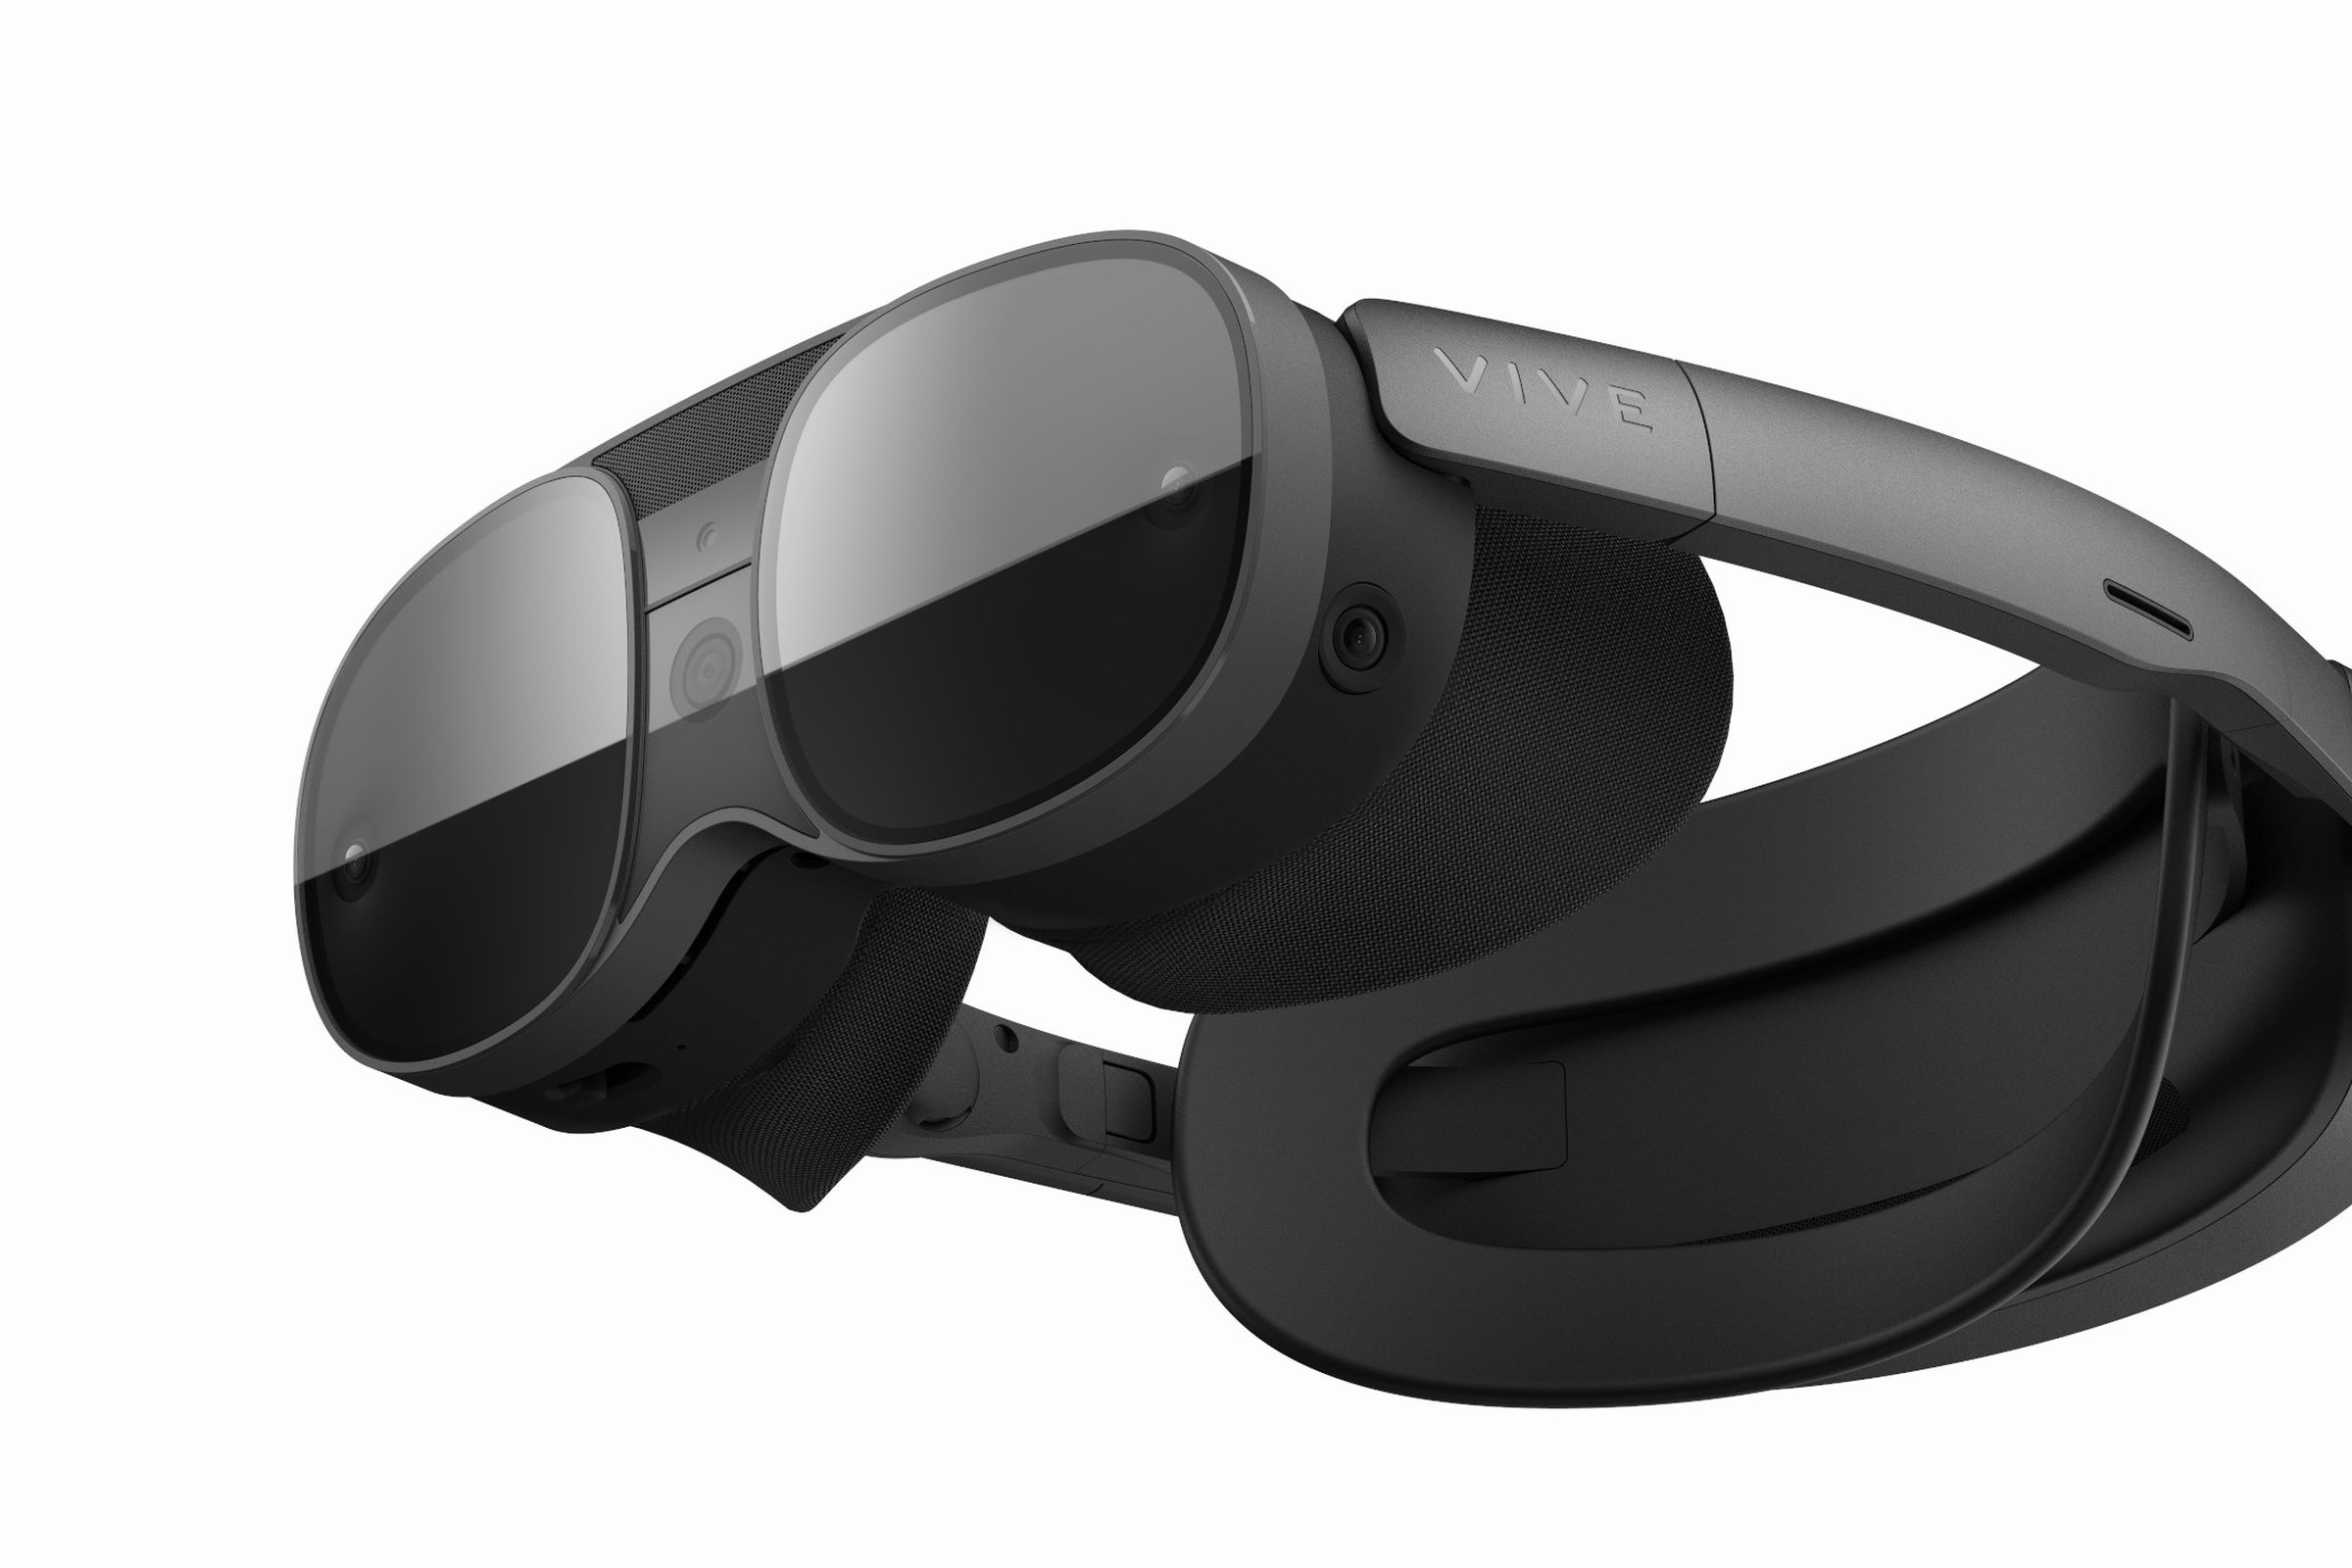 A black VR headset with a back strap and a glasses-like design.